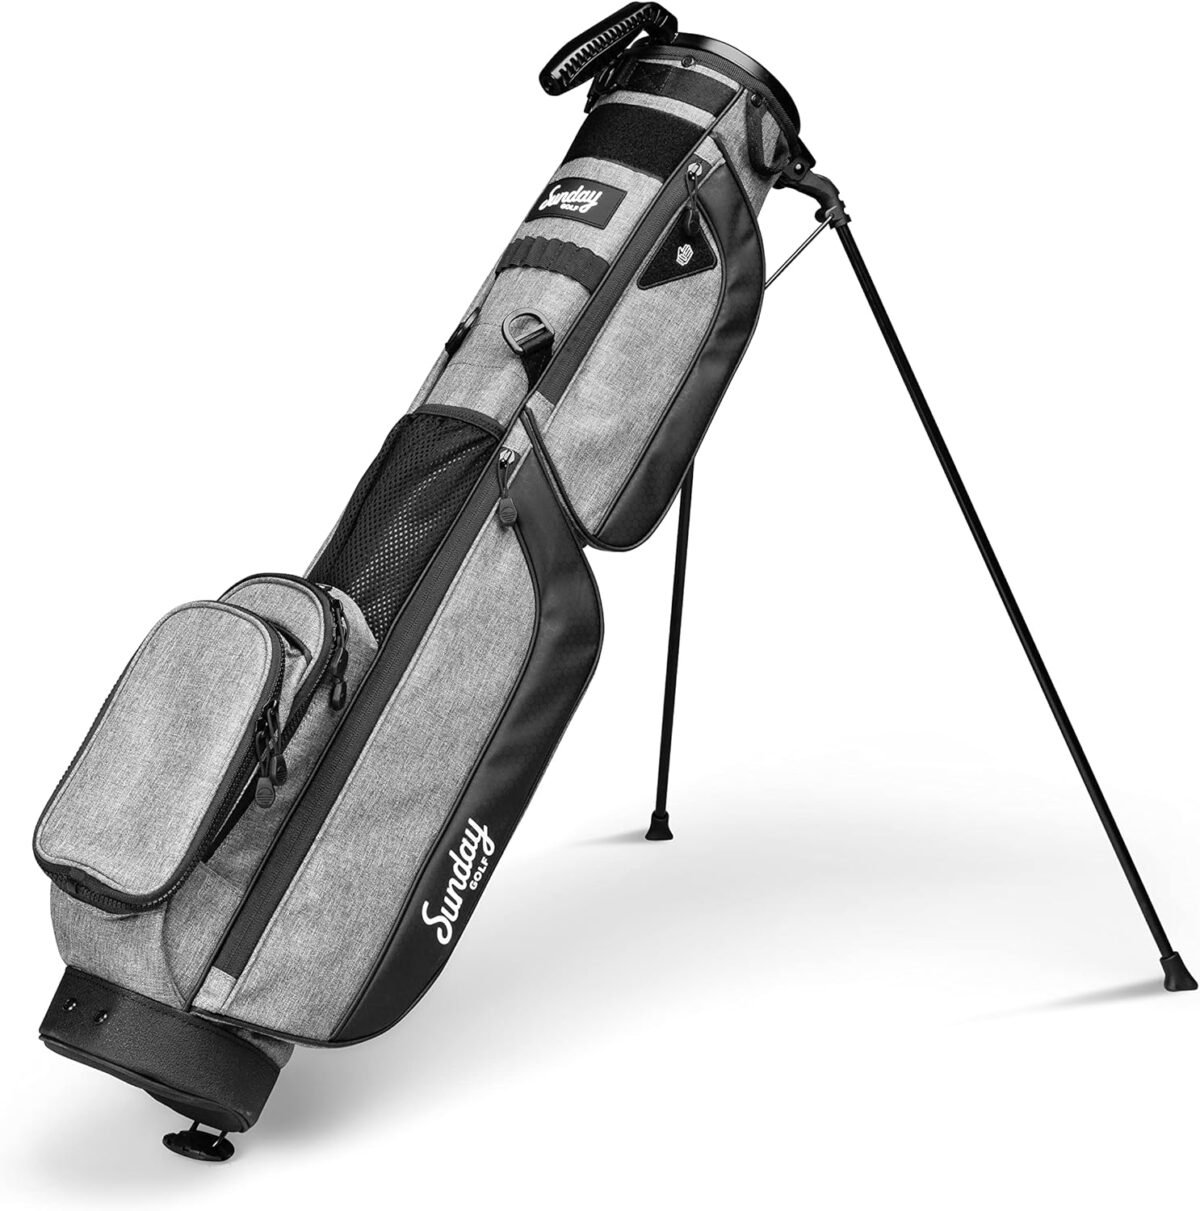 Comparing 5 Lightweight Golf Bags for Par 3 and Driving Range